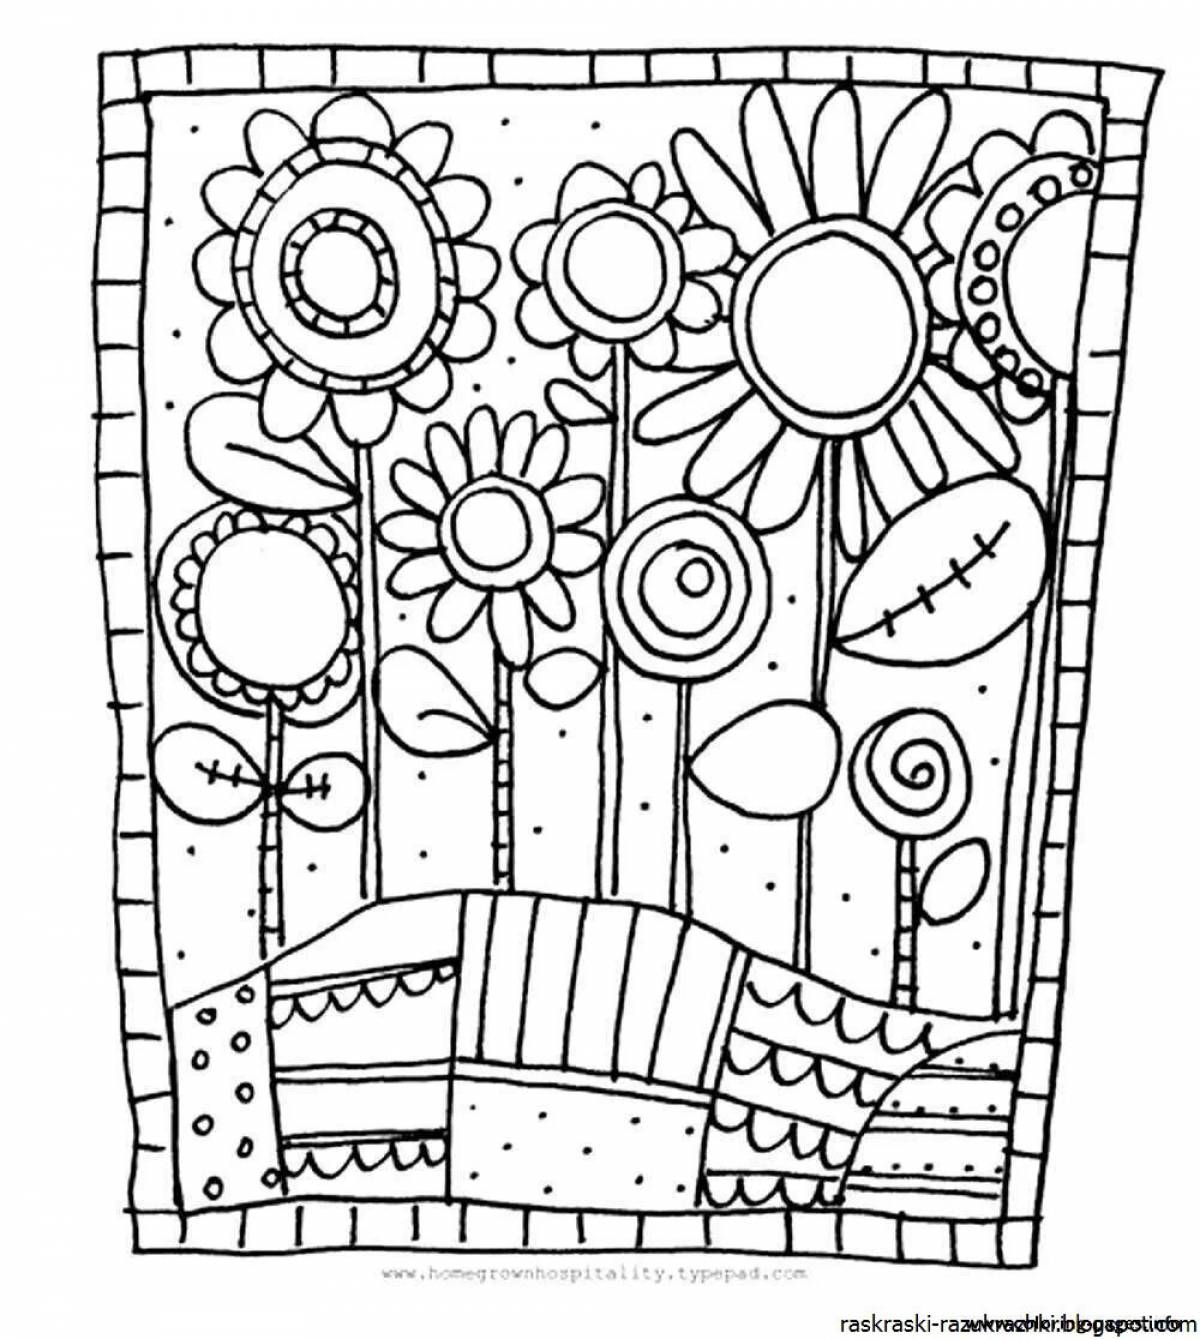 Exquisite antistress baby coloring book